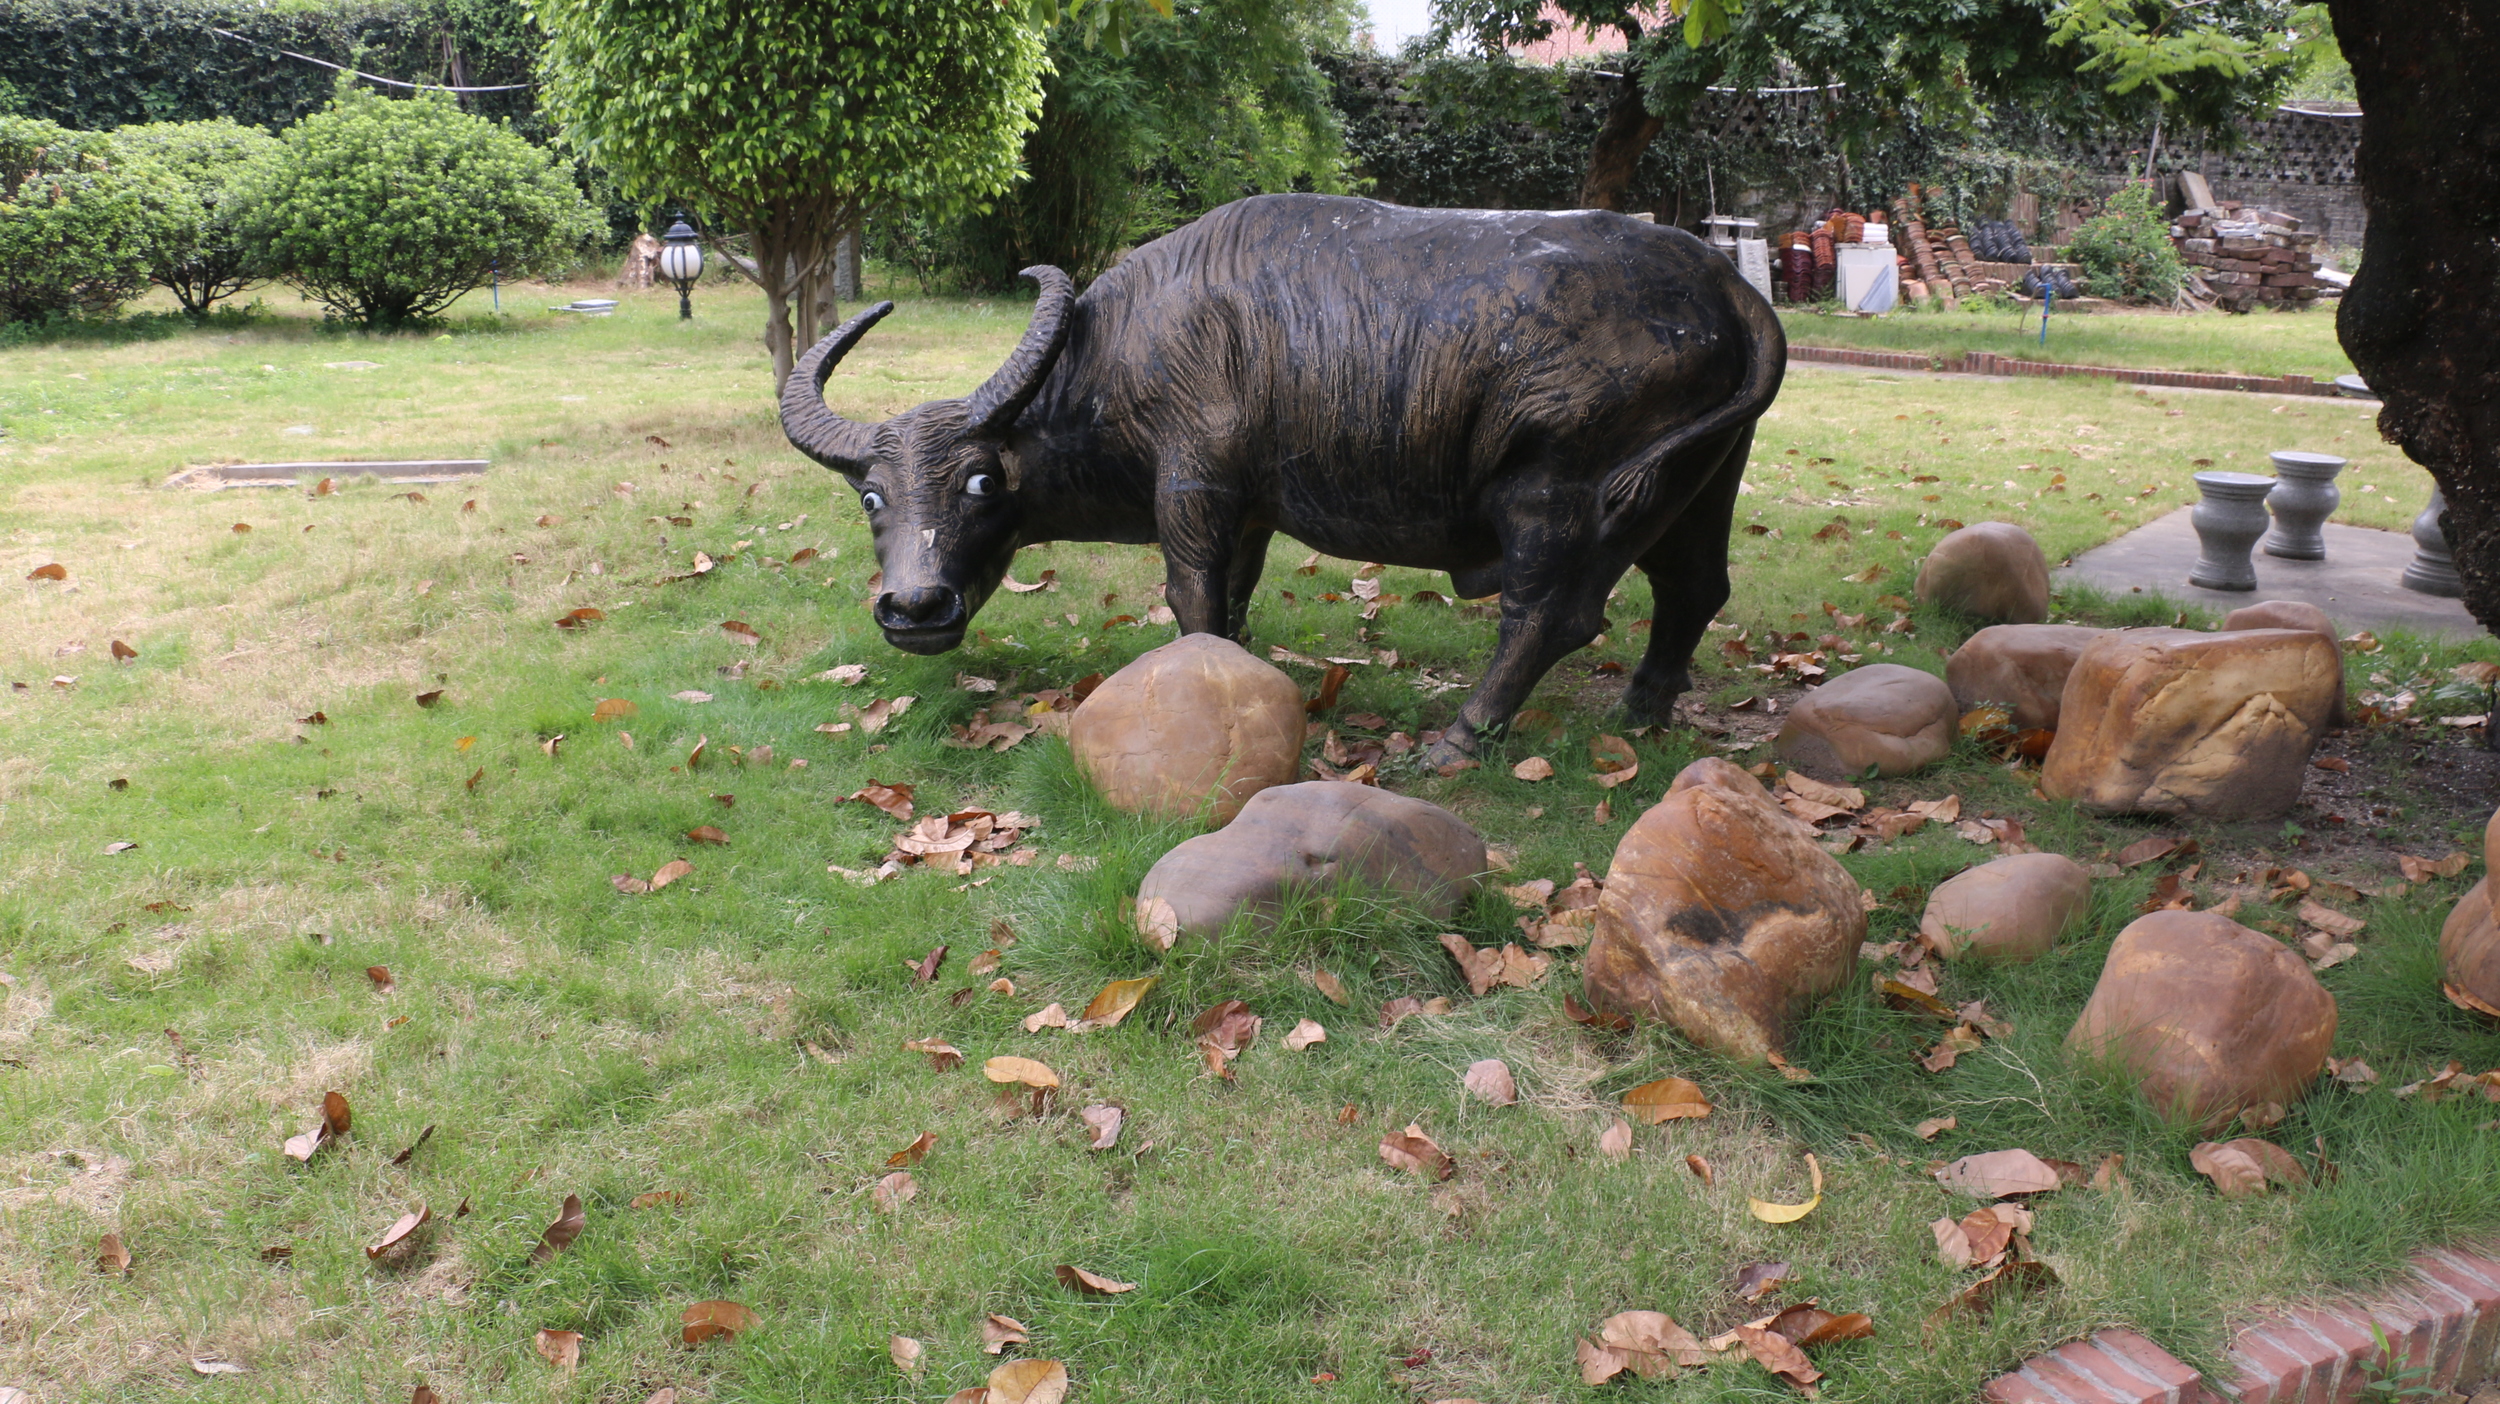 A statue of an ox in the gardens.